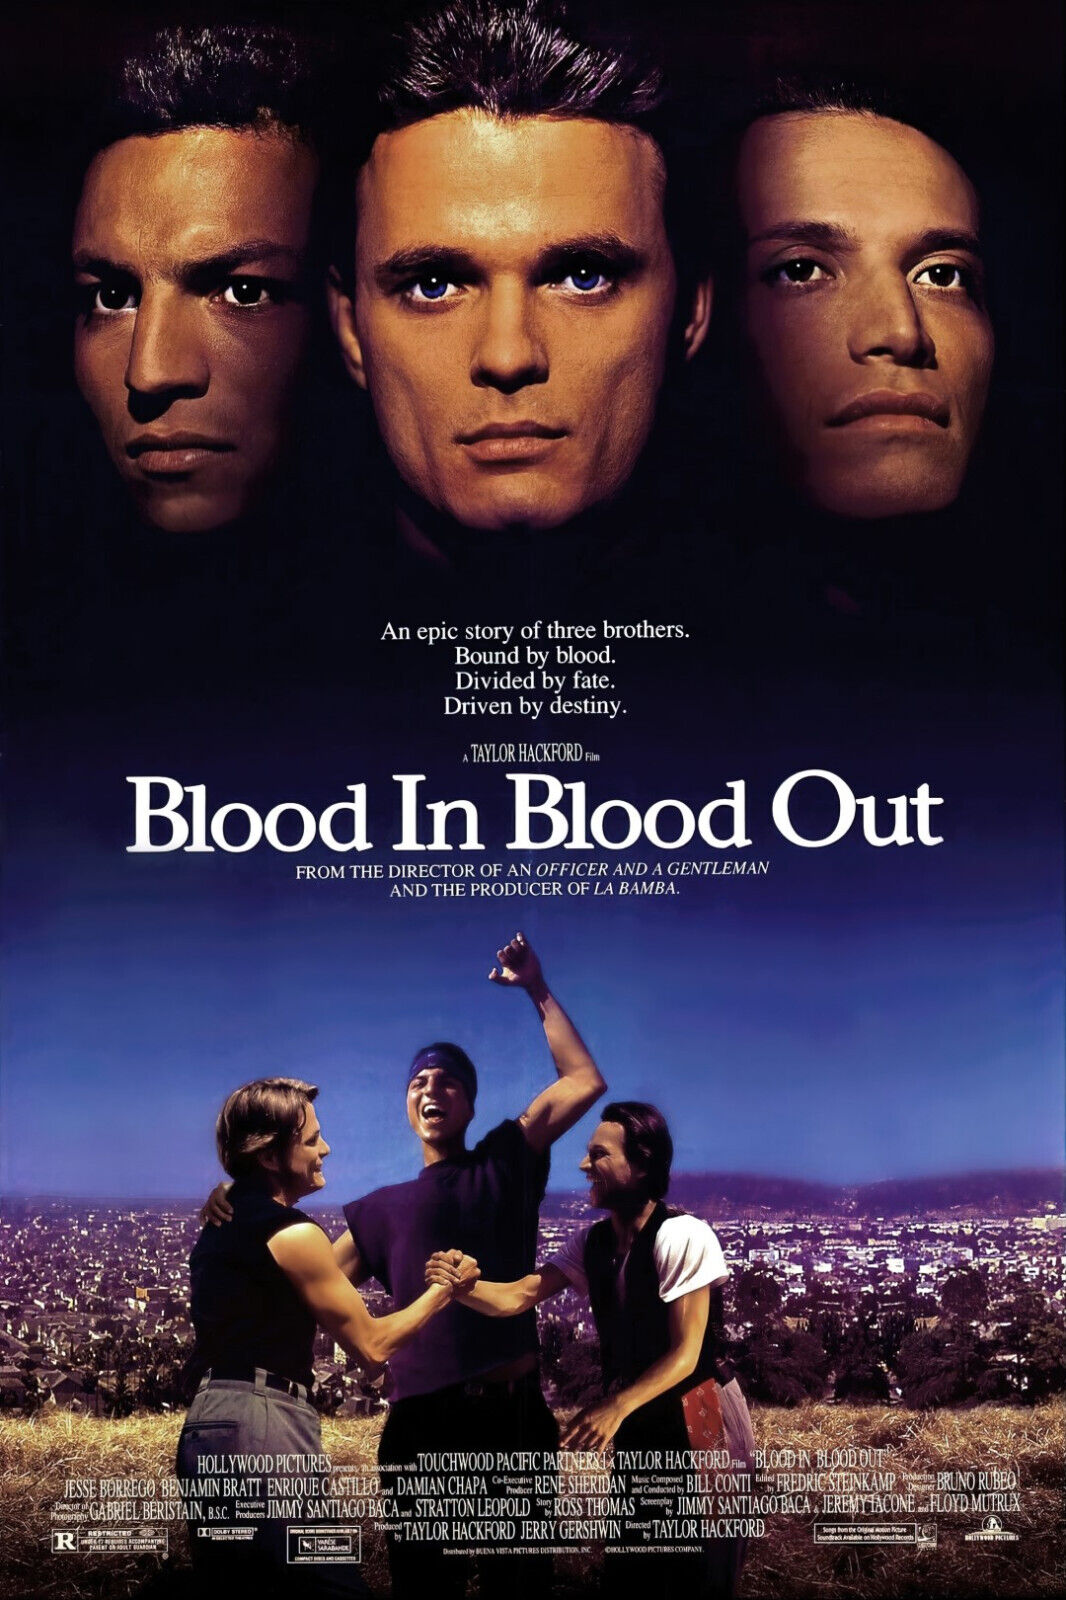 Blood In Blood Out' star Damian Chapa coming to Texas